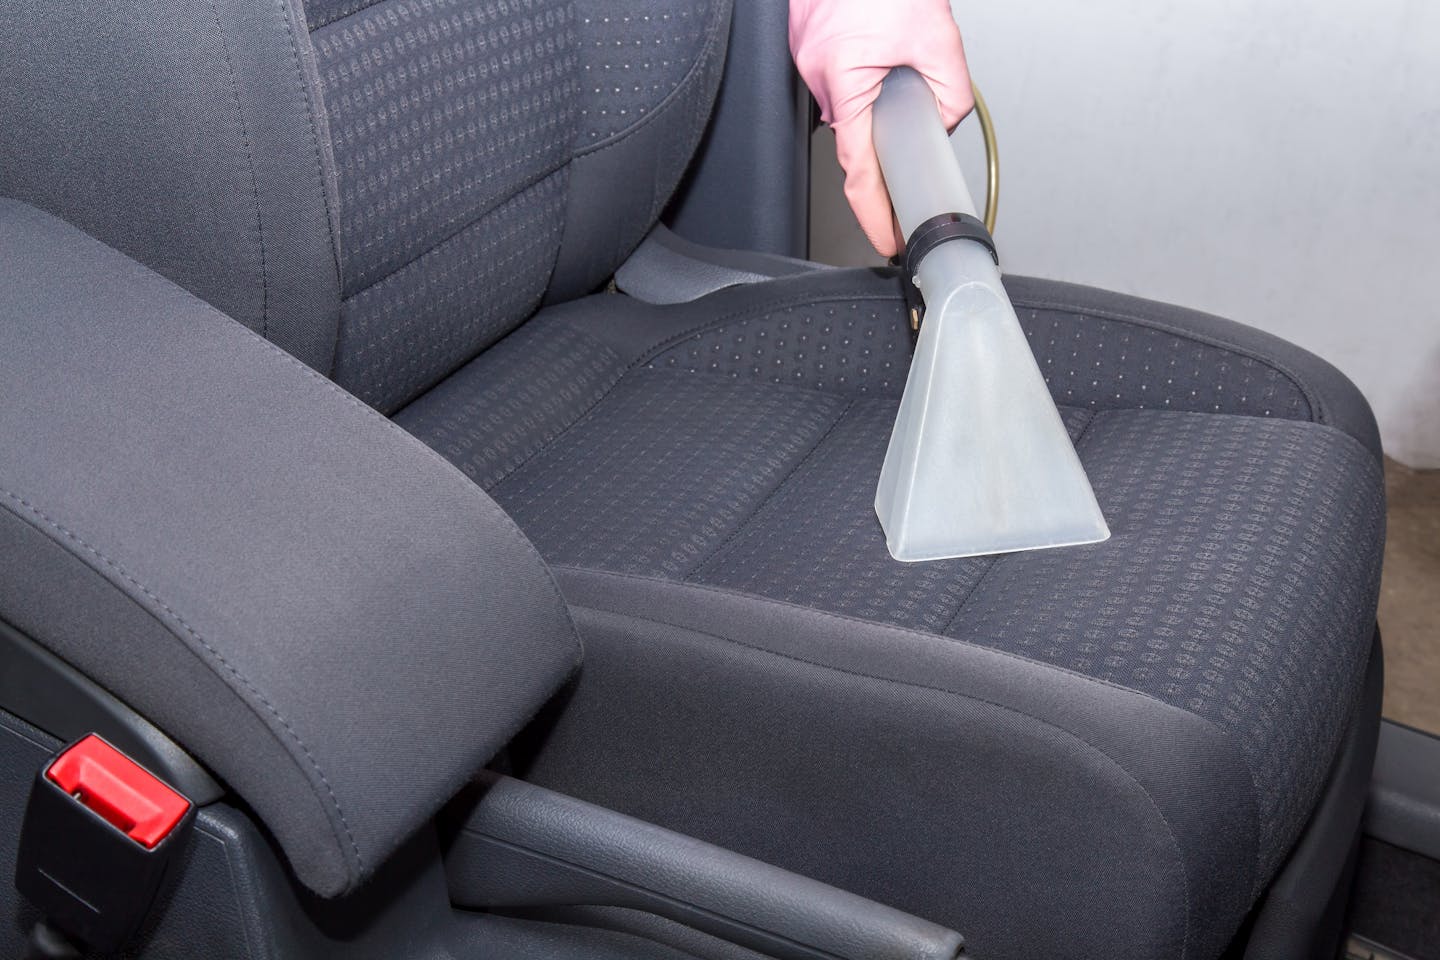 Car Carpet Cleaners For Soiled Car Fabrics And Carpets